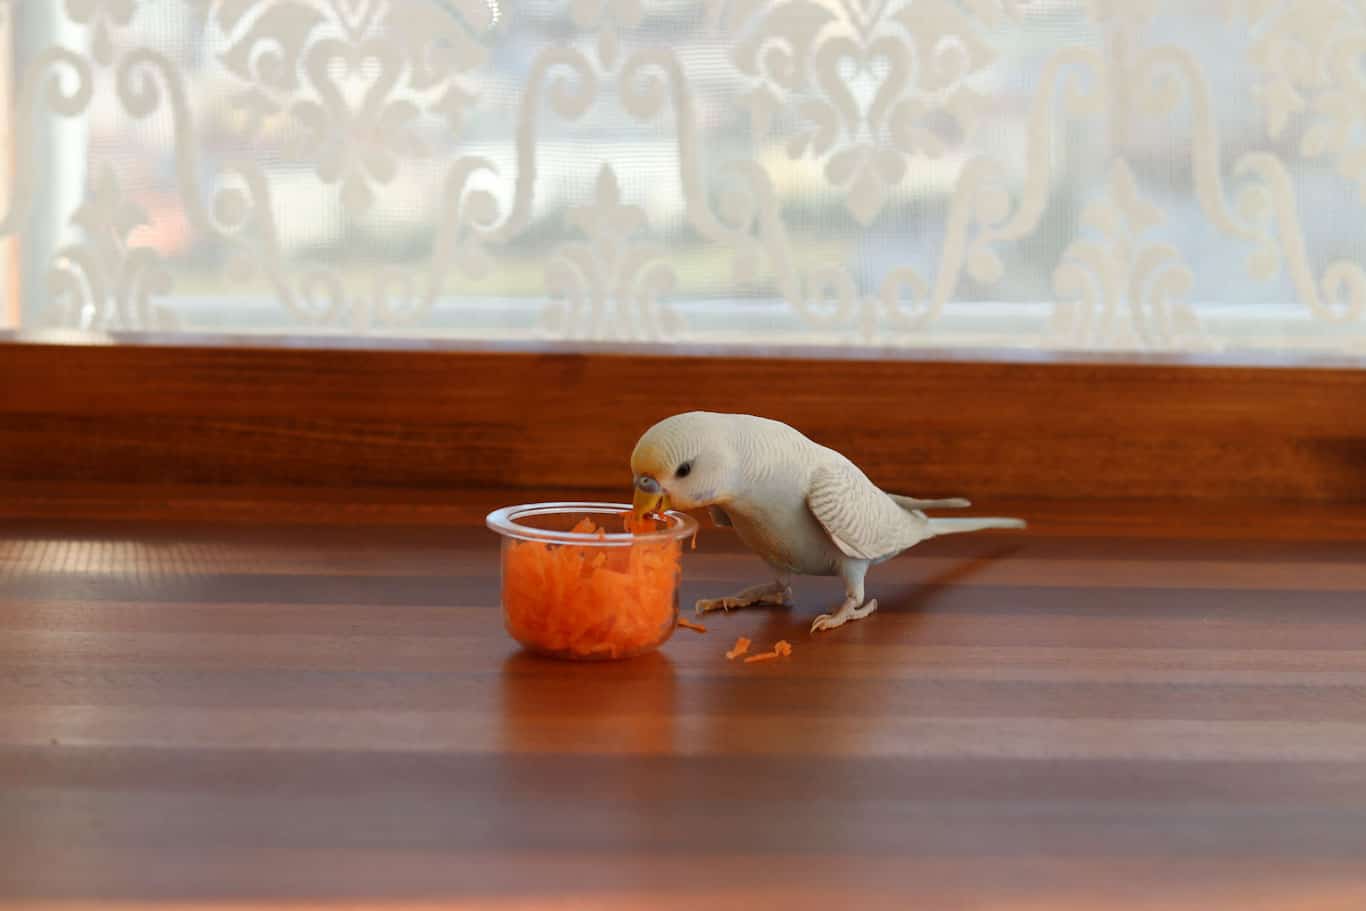 Can Parakeets Eat Carrots?